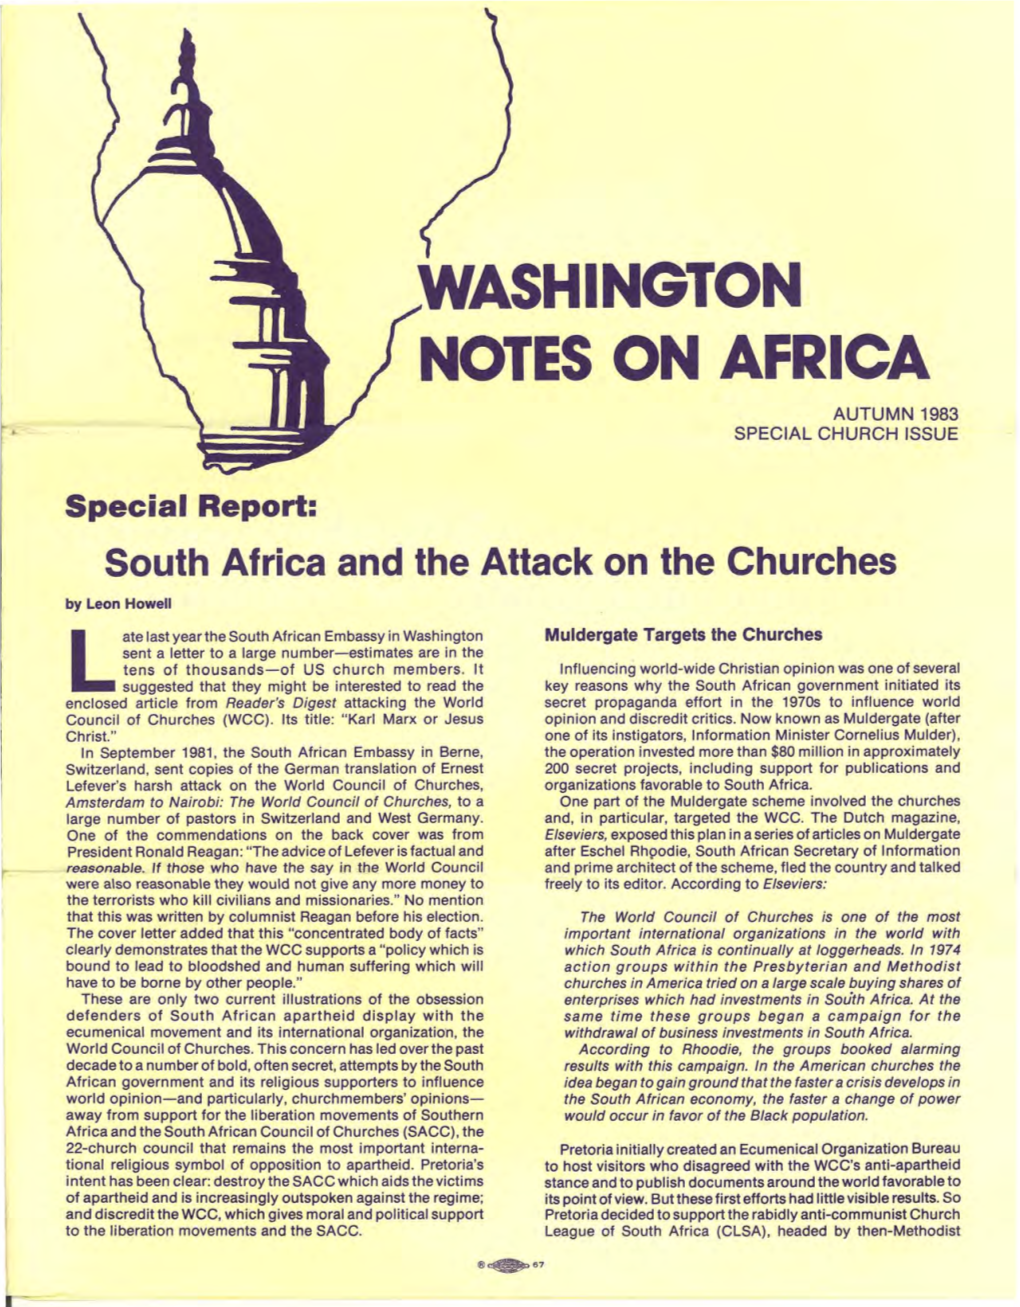 Washington Notes on Africa Autumn 1983 Special Church Issue